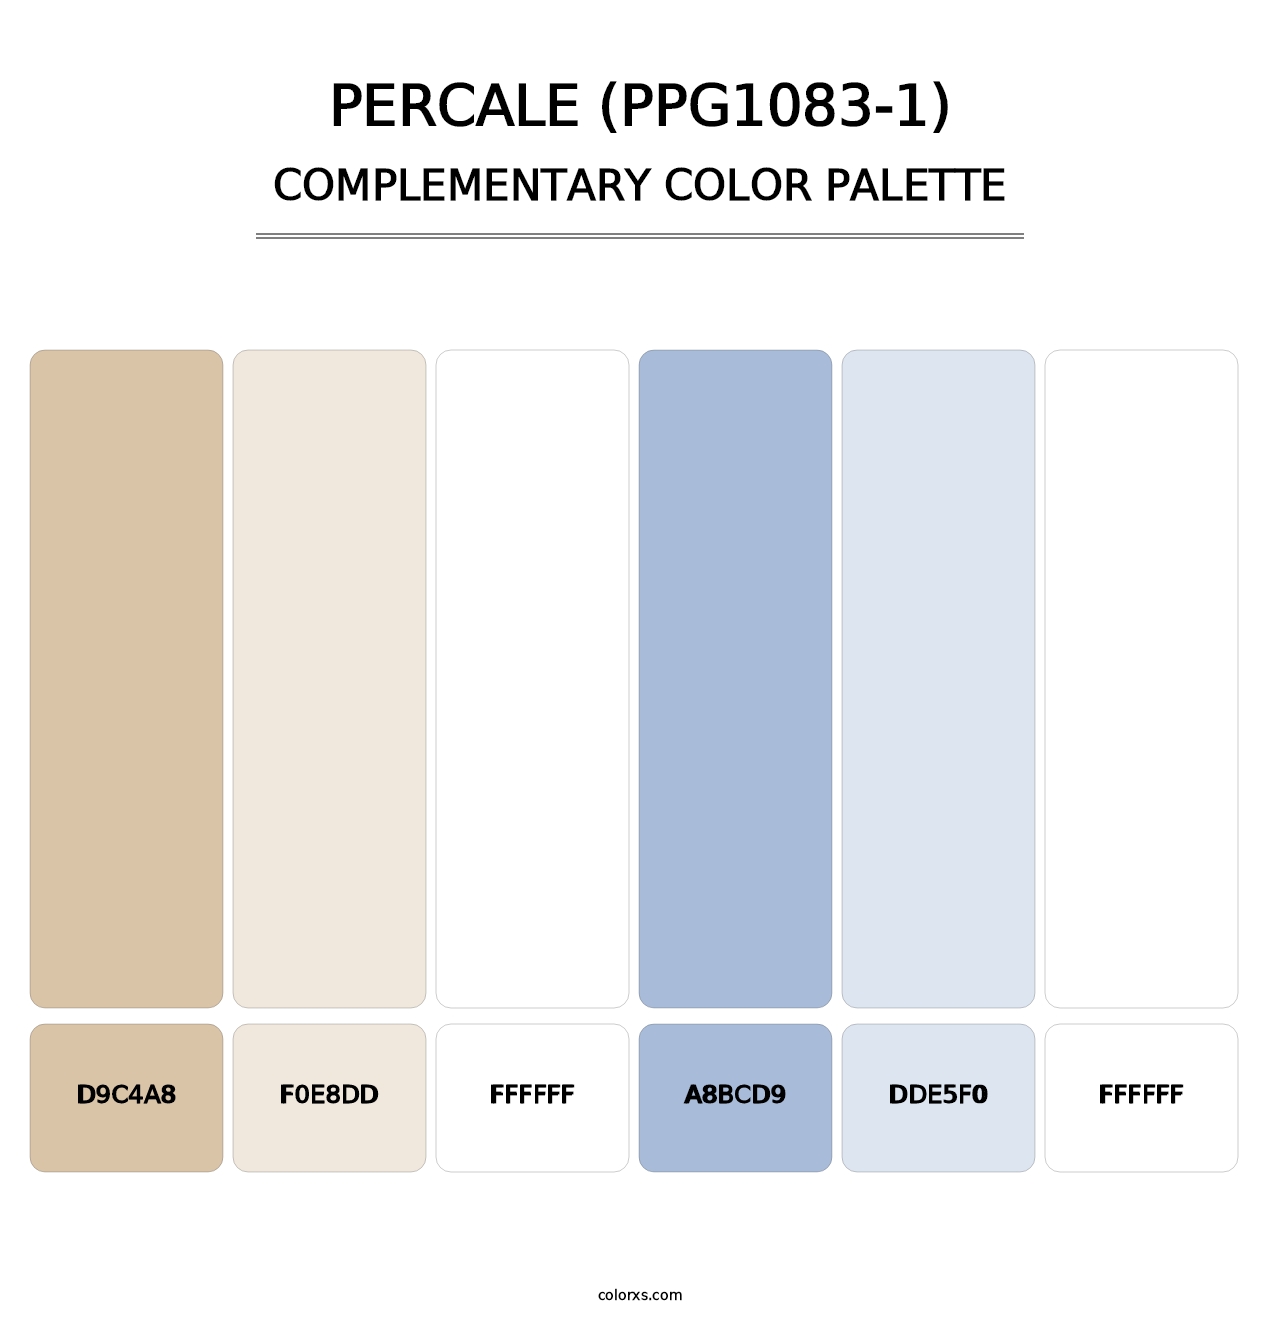 Percale (PPG1083-1) - Complementary Color Palette